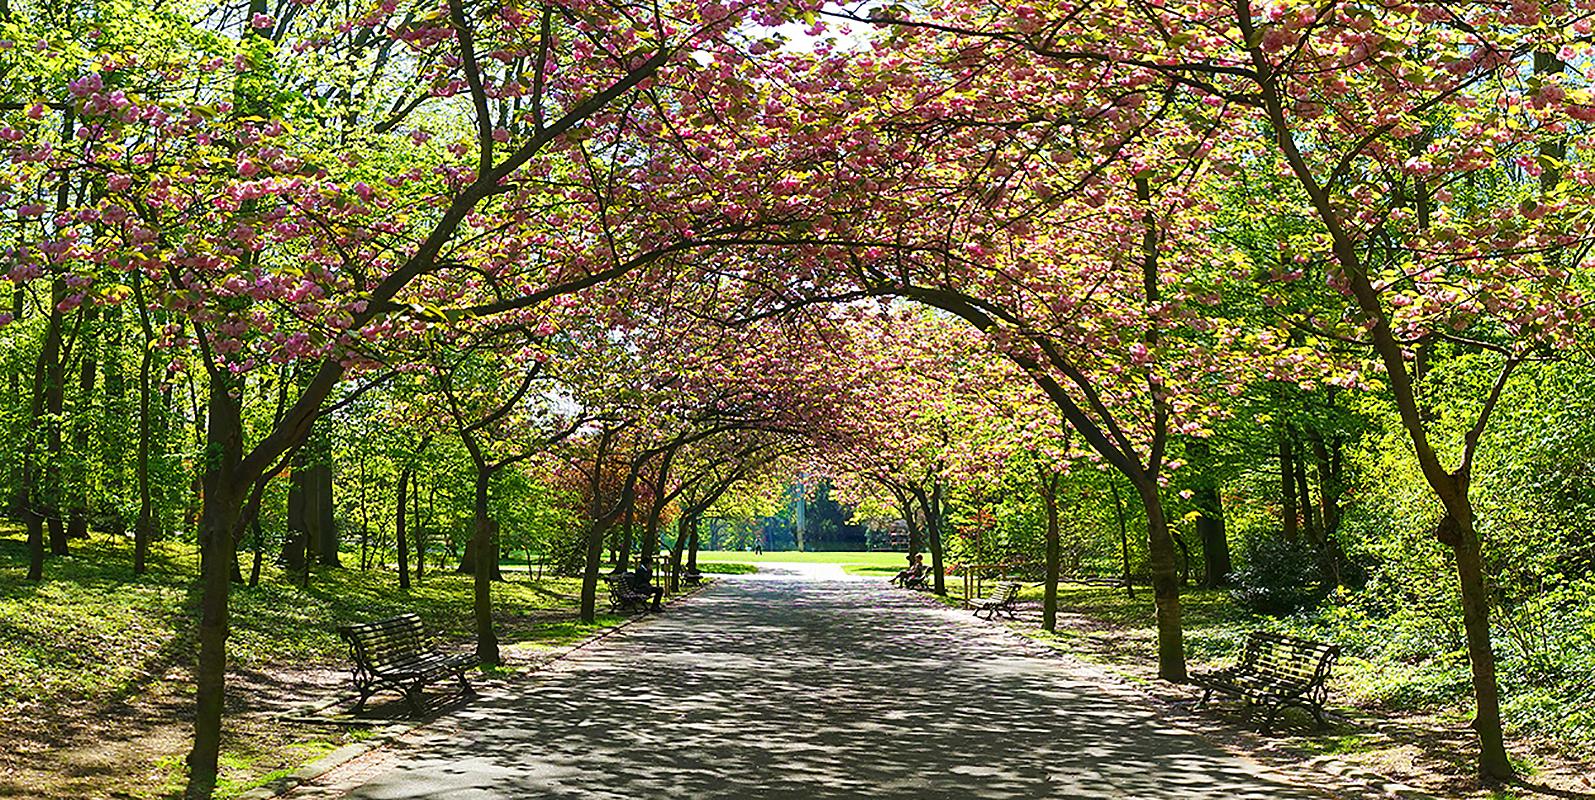 Panoramic view from the entrance of the Josaphat park in Brussels made from 12 pictures
Pigment photographic paper - photography & fine art print © Jean Pierre De Neef 
You make my head spin serie - Tribute to Belgium
The technique of assembling